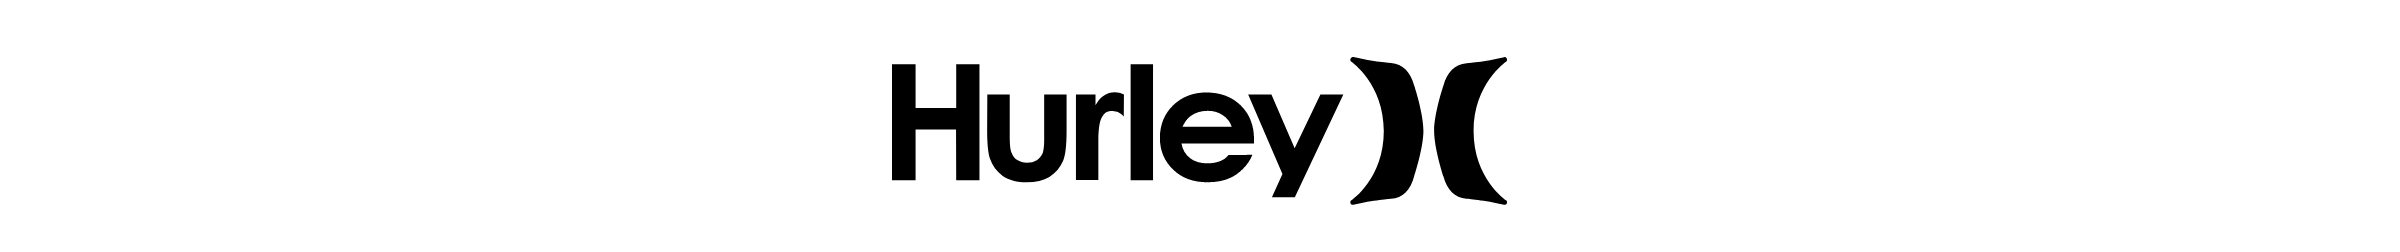 UP TO 40% OFF HURLEY